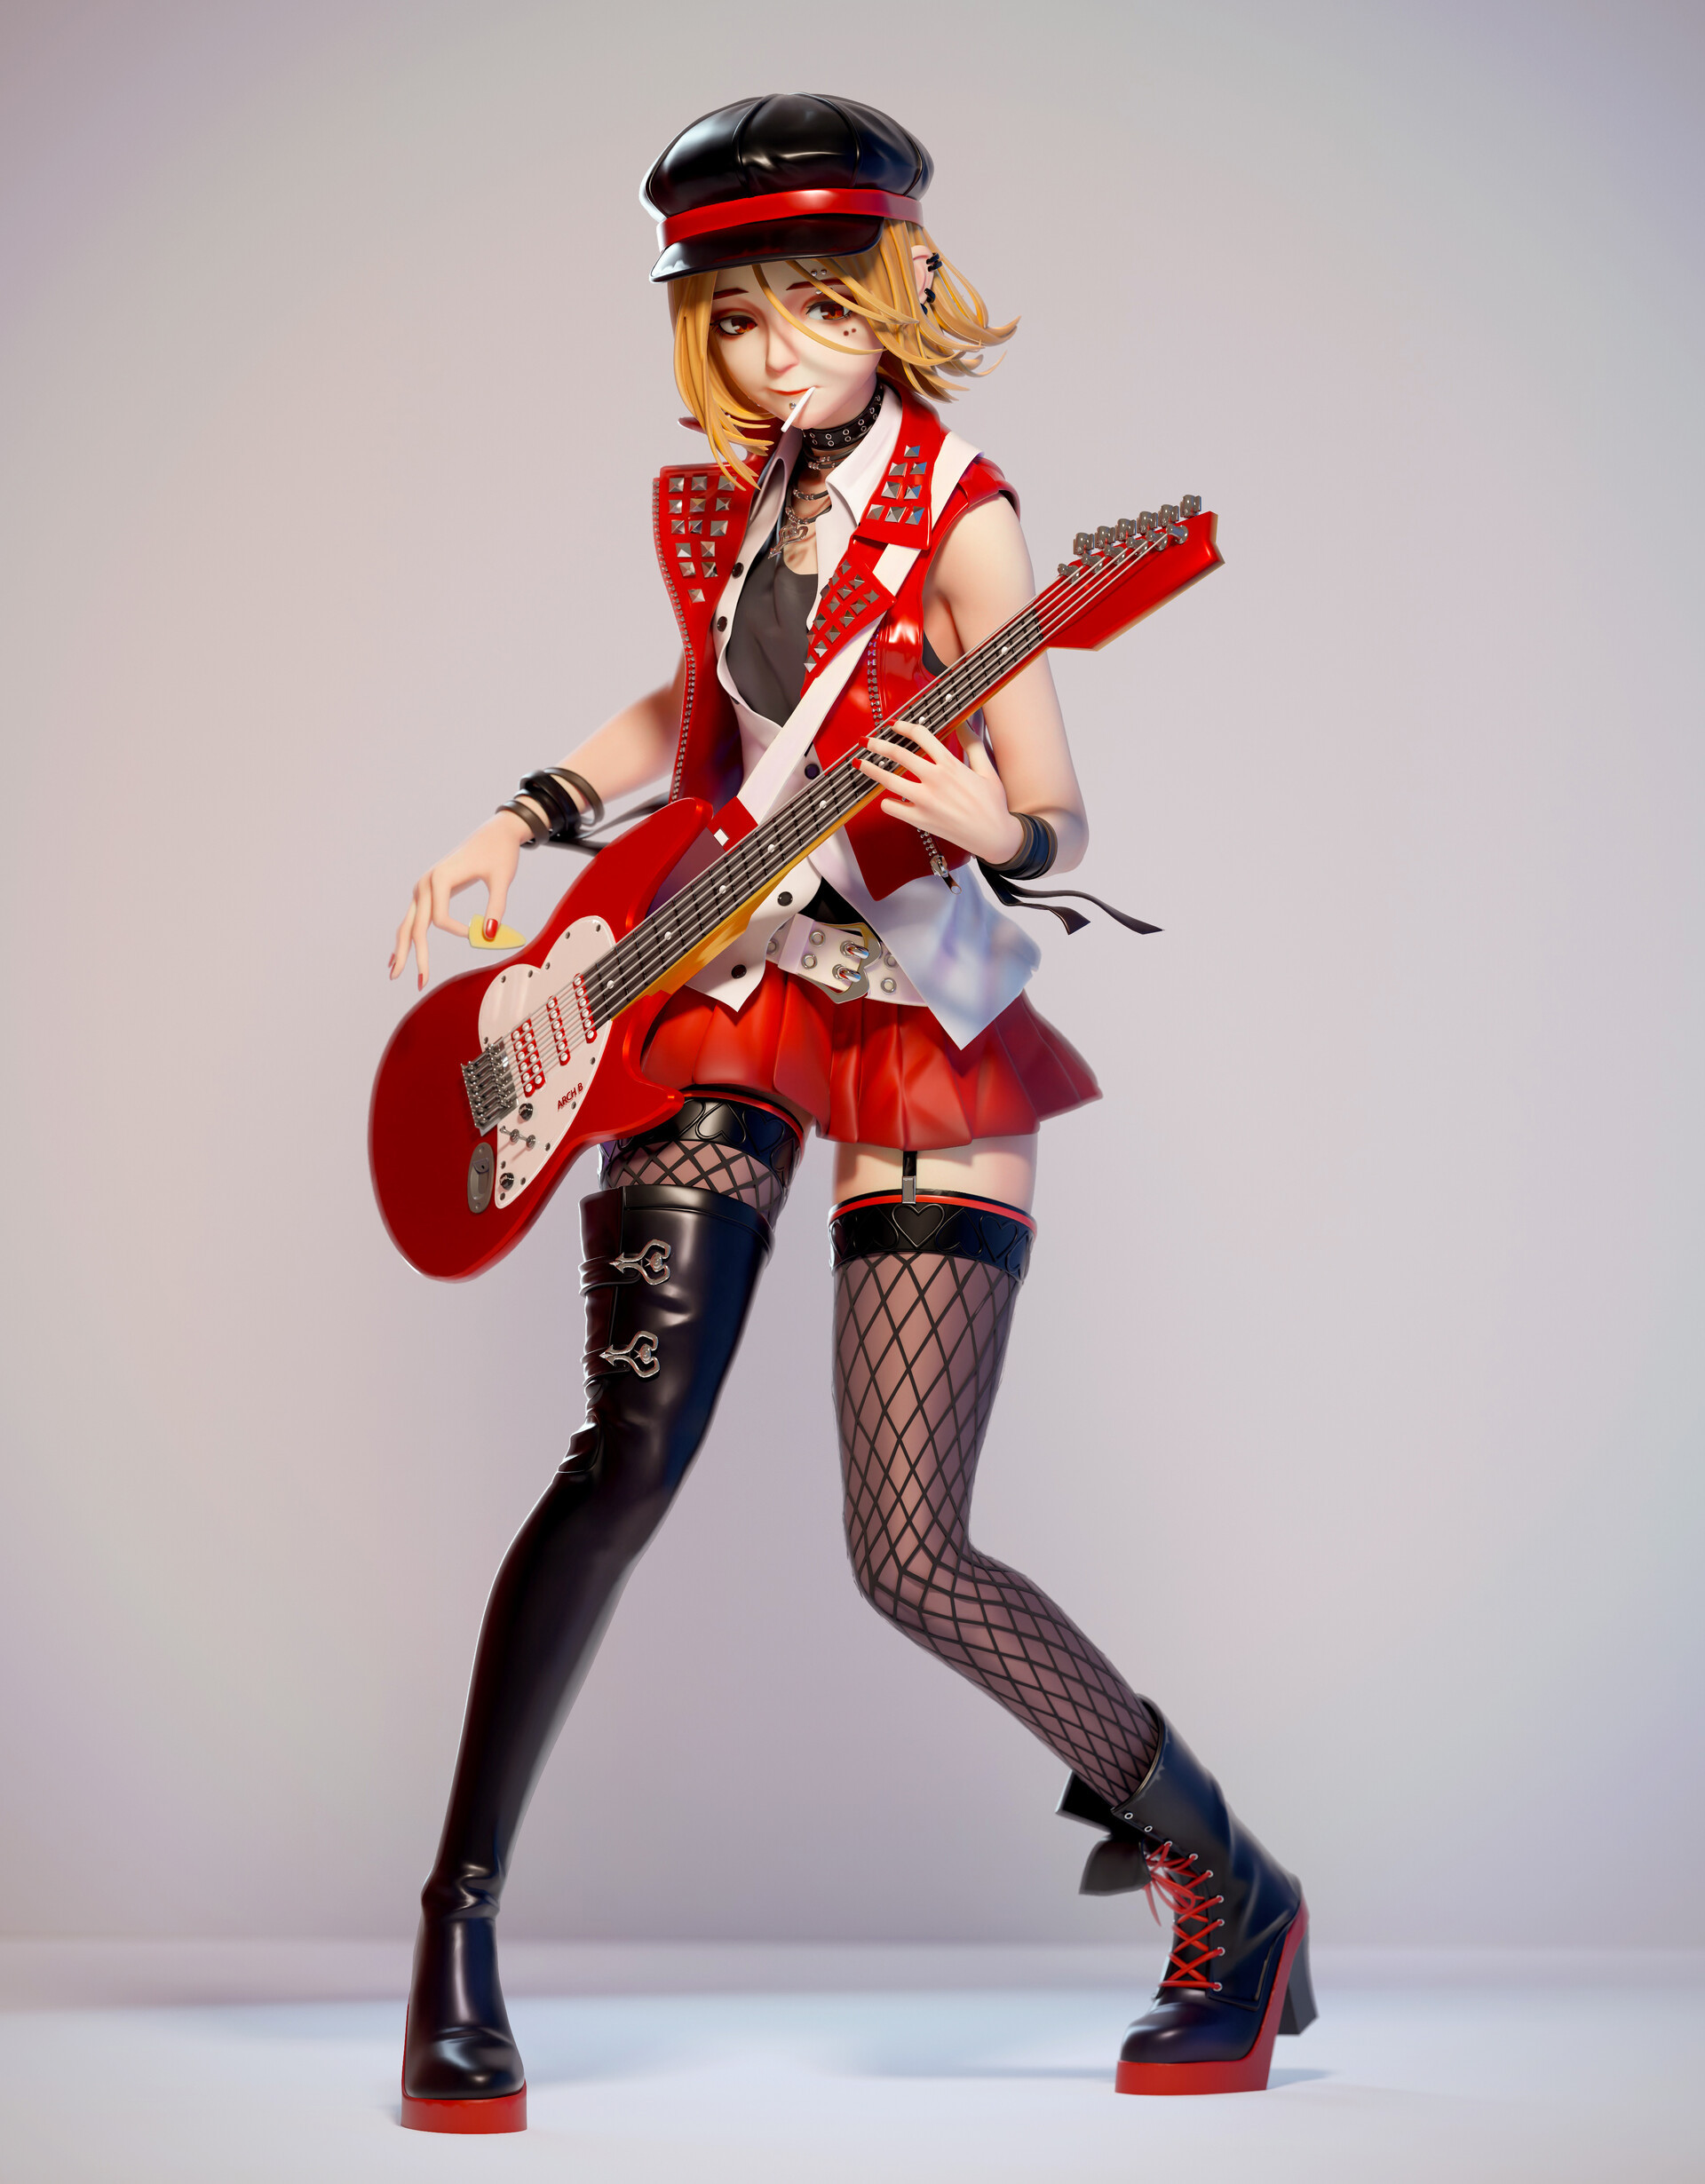 Digital 3D Graphics Women Boots Hat Guitar Simple Background Blonde Musical Instrument Women With Ha 1920x2460